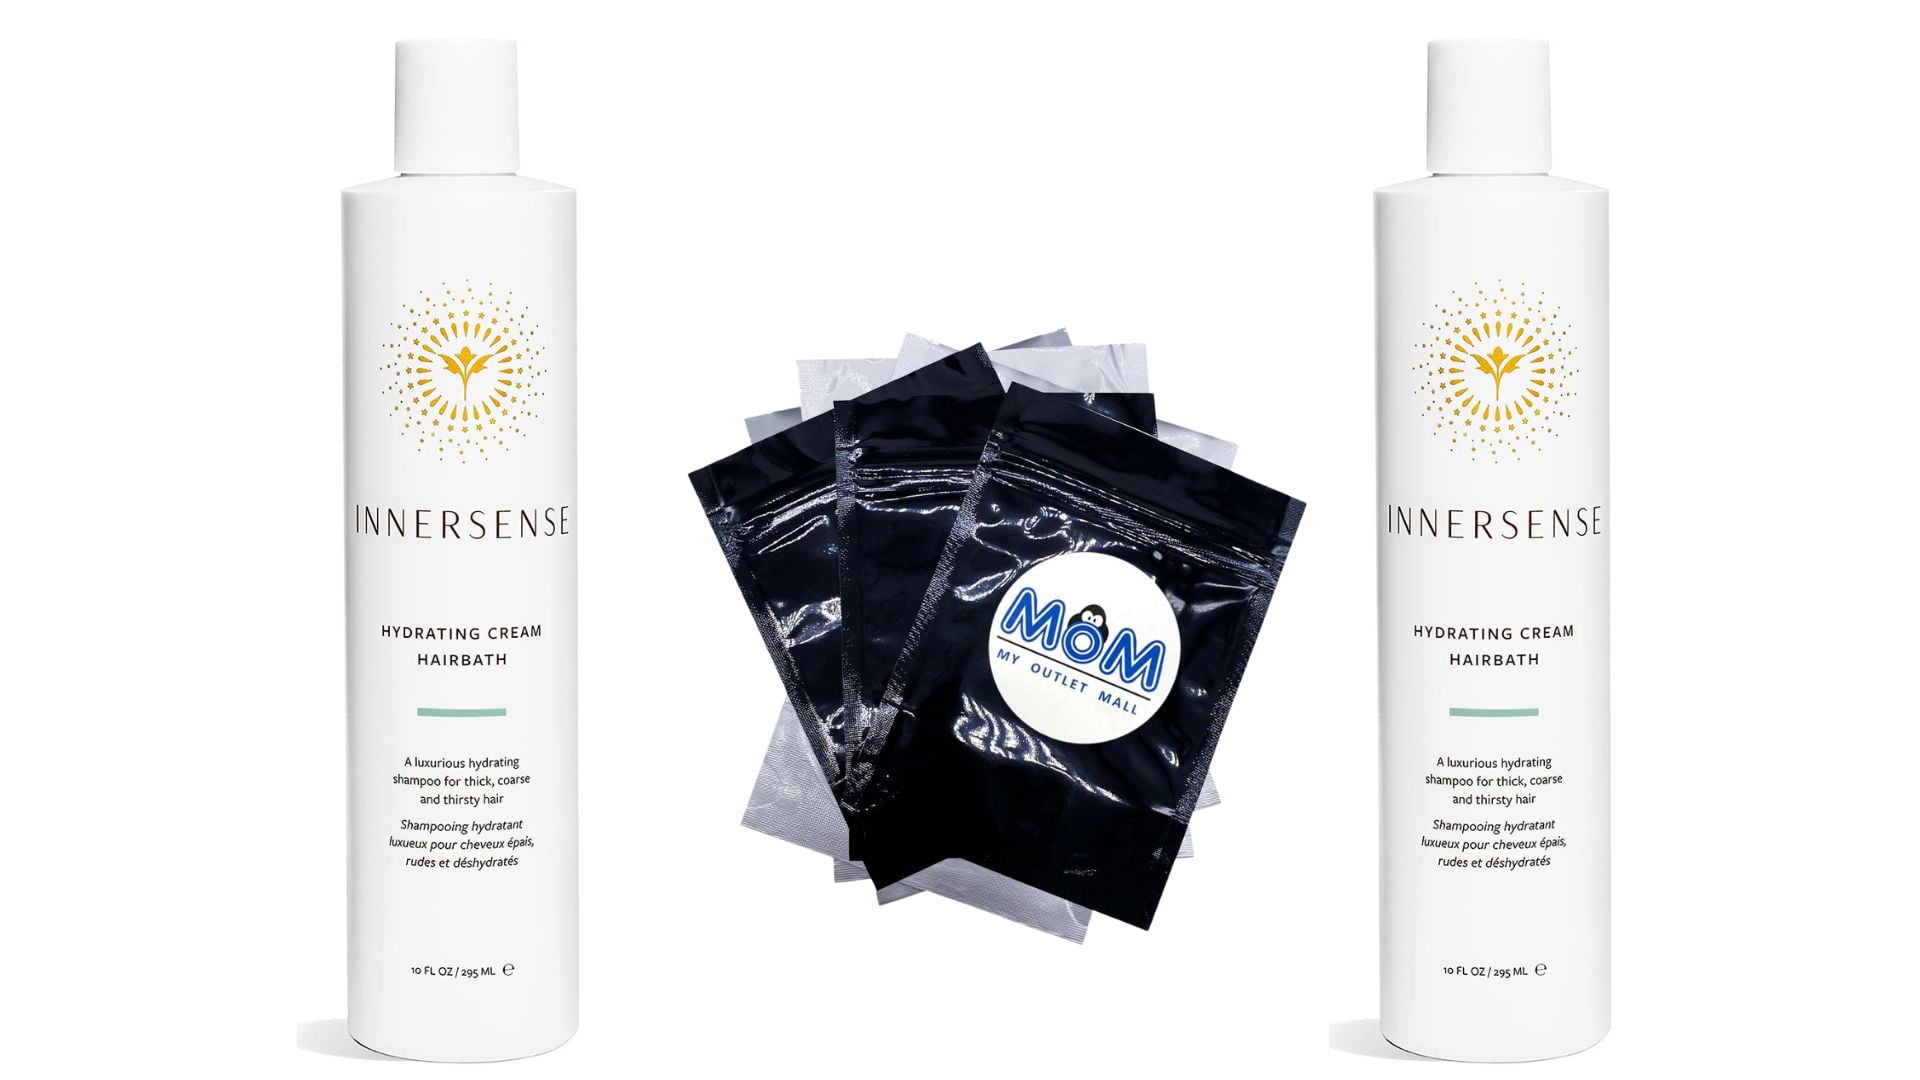 Innersense Hydrating Creme Hairbath Shampoo - pack - Bottles per pack - Innersense- plus 3 My Outlet Resealable Storage Pouches - Walmart.com